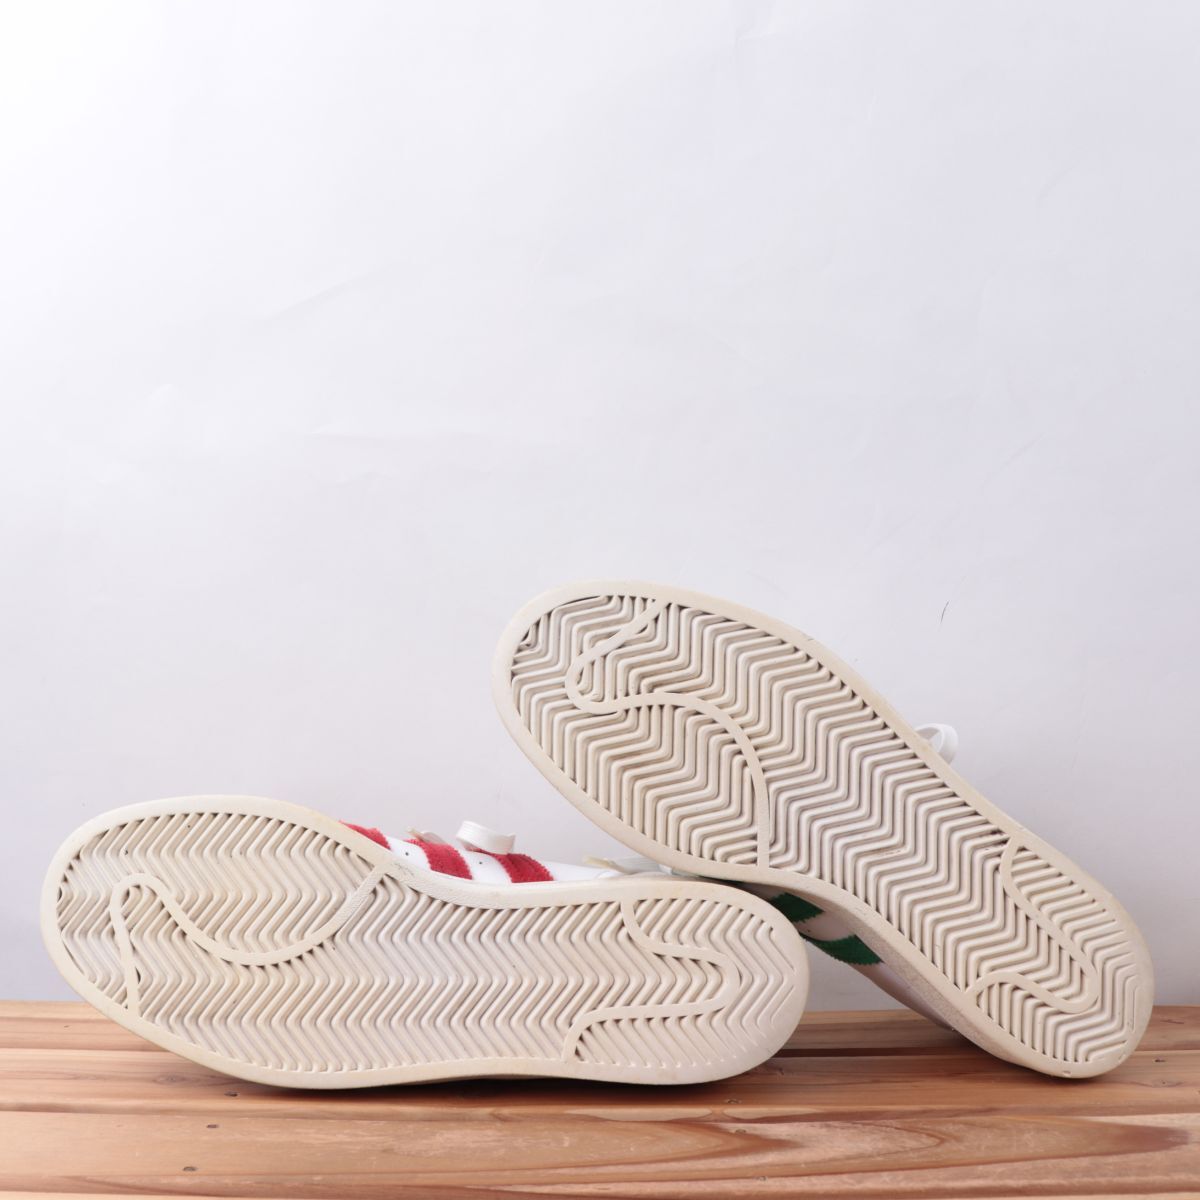 z3363 Adidas super Star US8 1/2 26.5cm/ white white red green cream series adidas SUPERSTAR men's sneakers used 